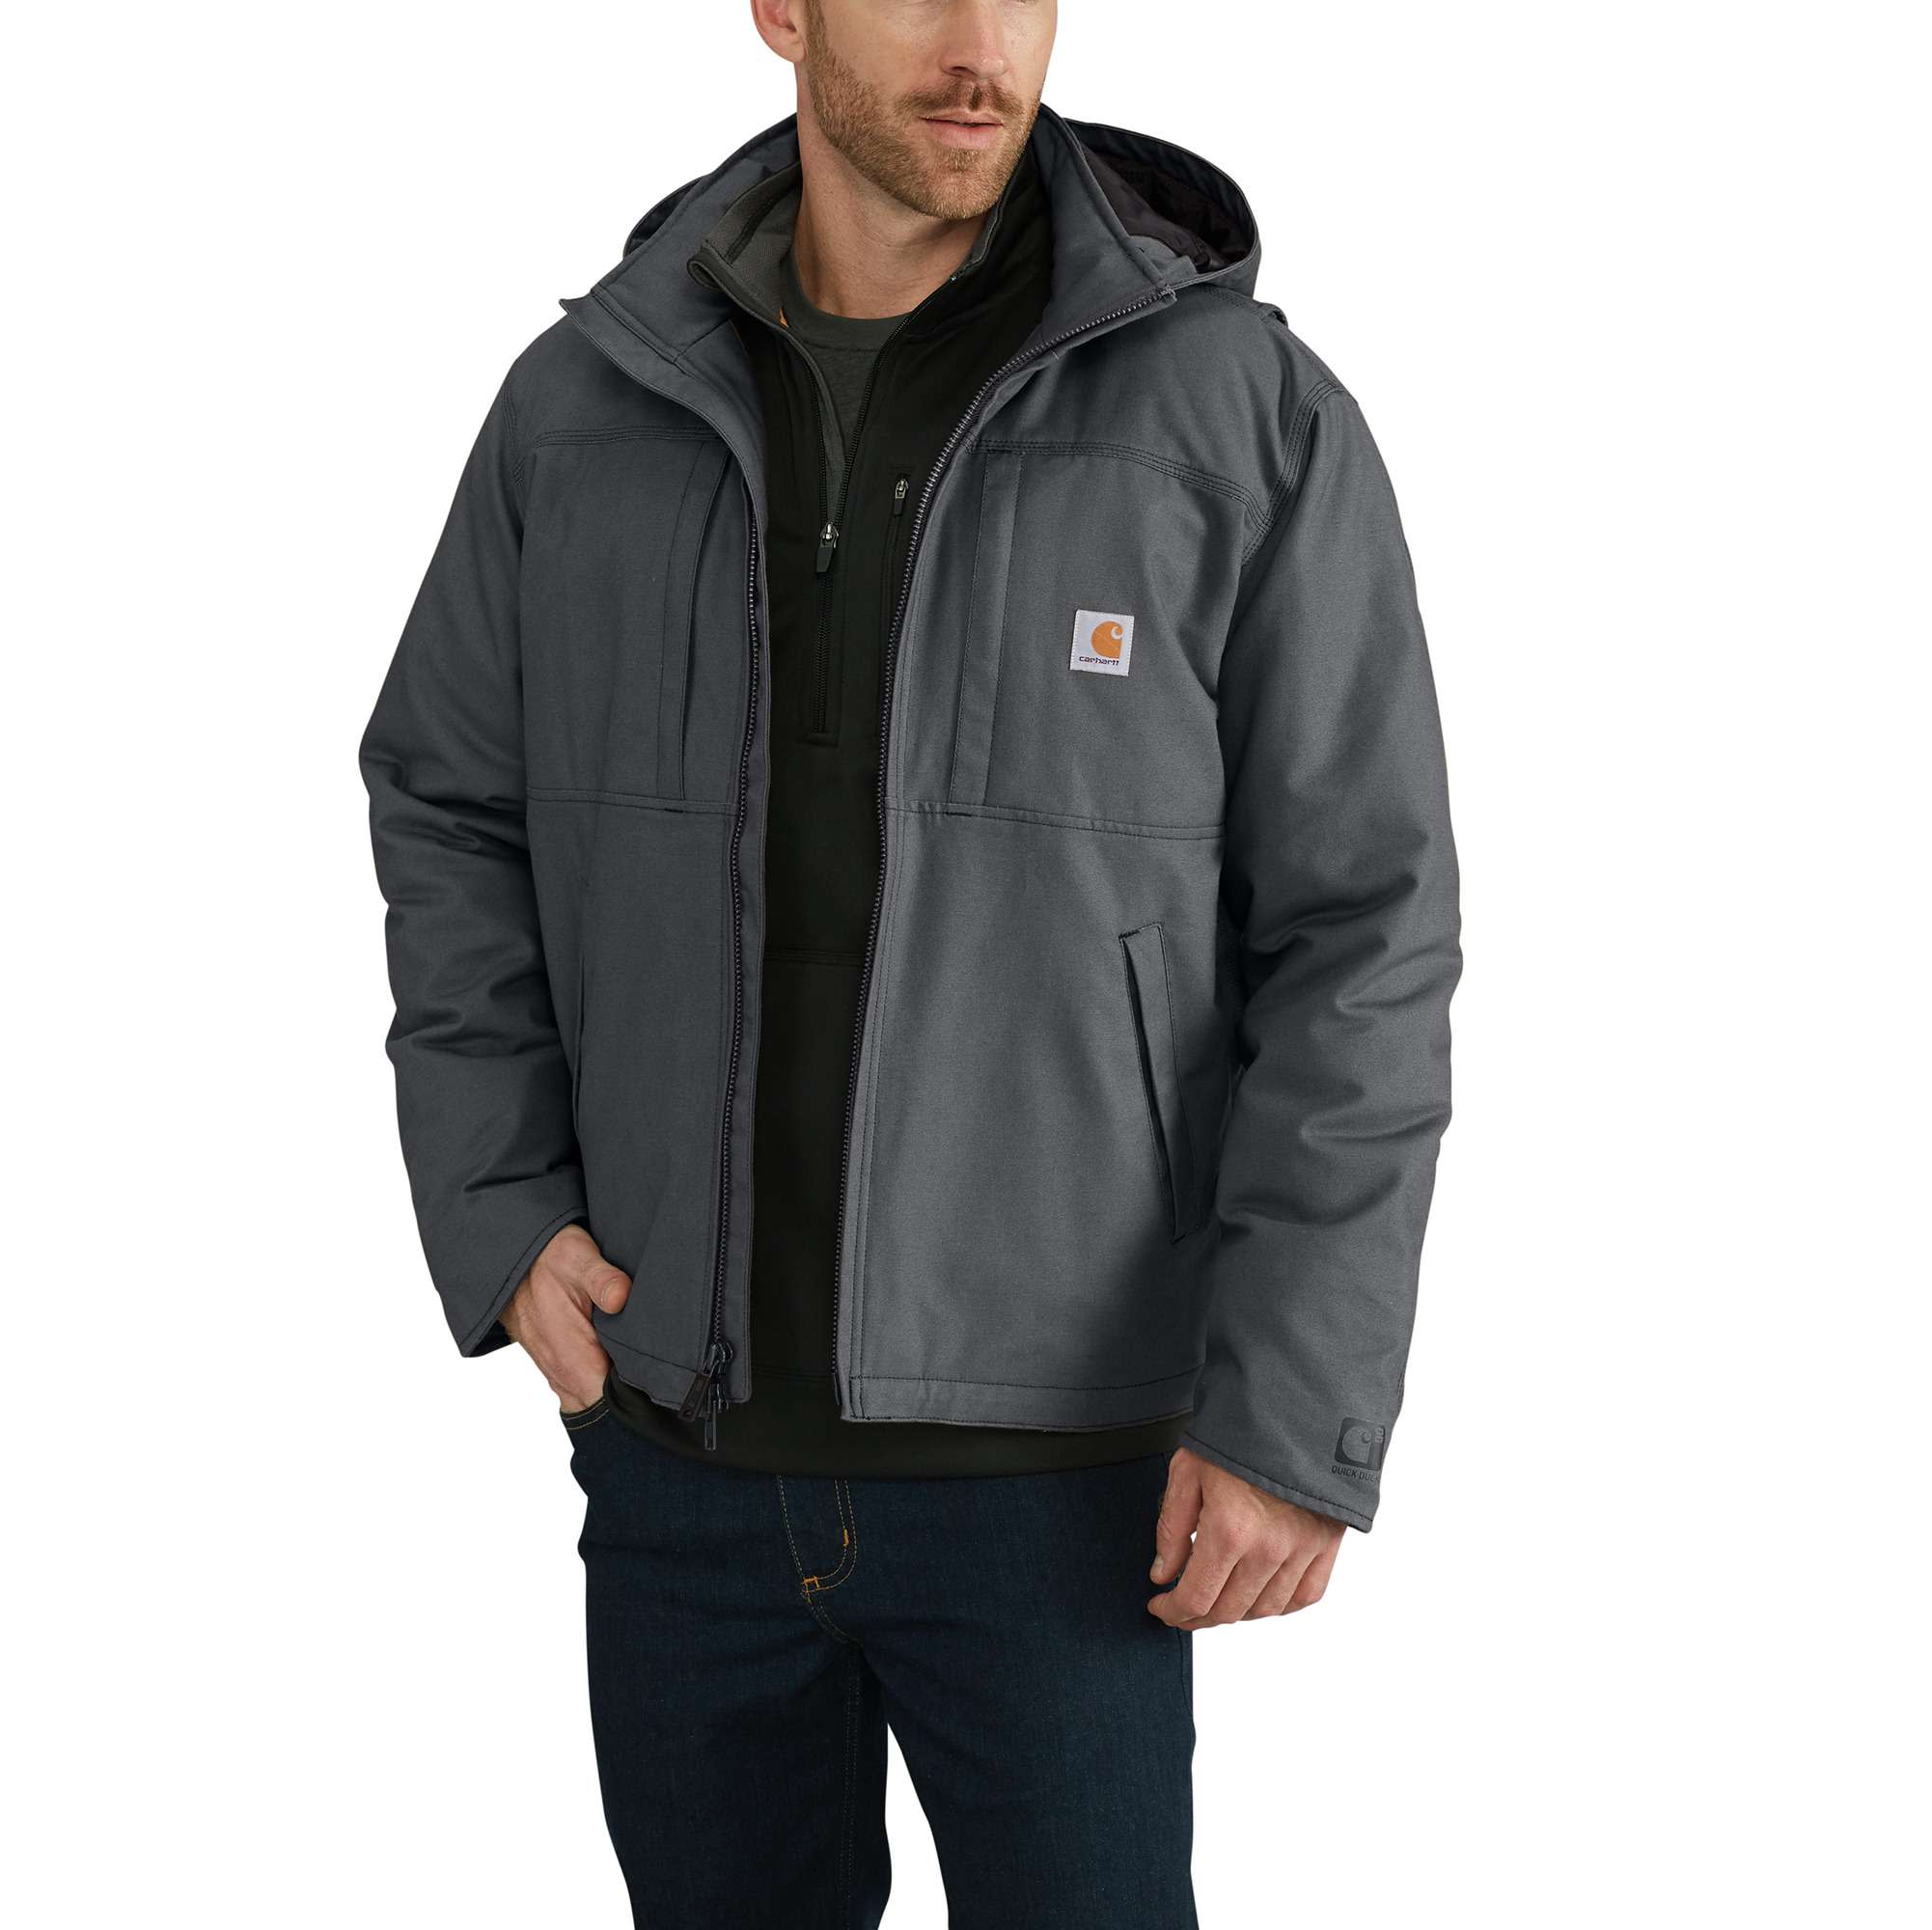 Full Swing® Loose Fit Quick Duck Insulated Jacket - 3 Warmest